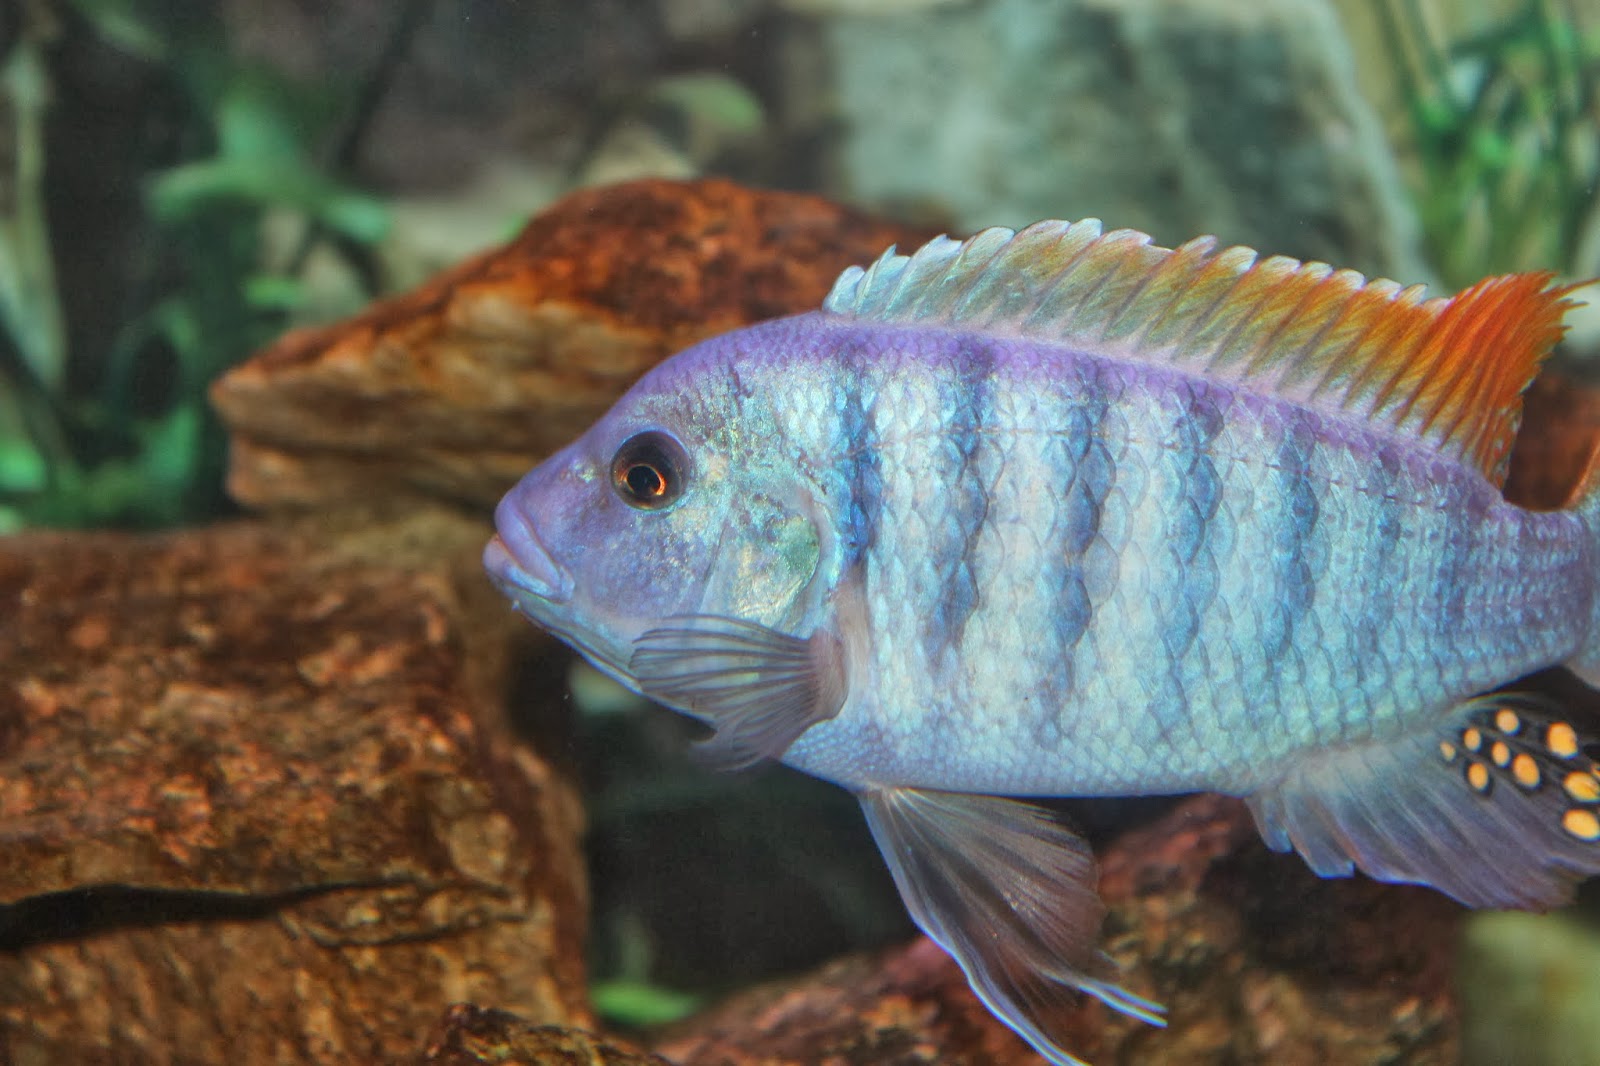 Common Name(s): Red Top Zebra Cichlid, Ice Red top Zebra, Ice blue cich...